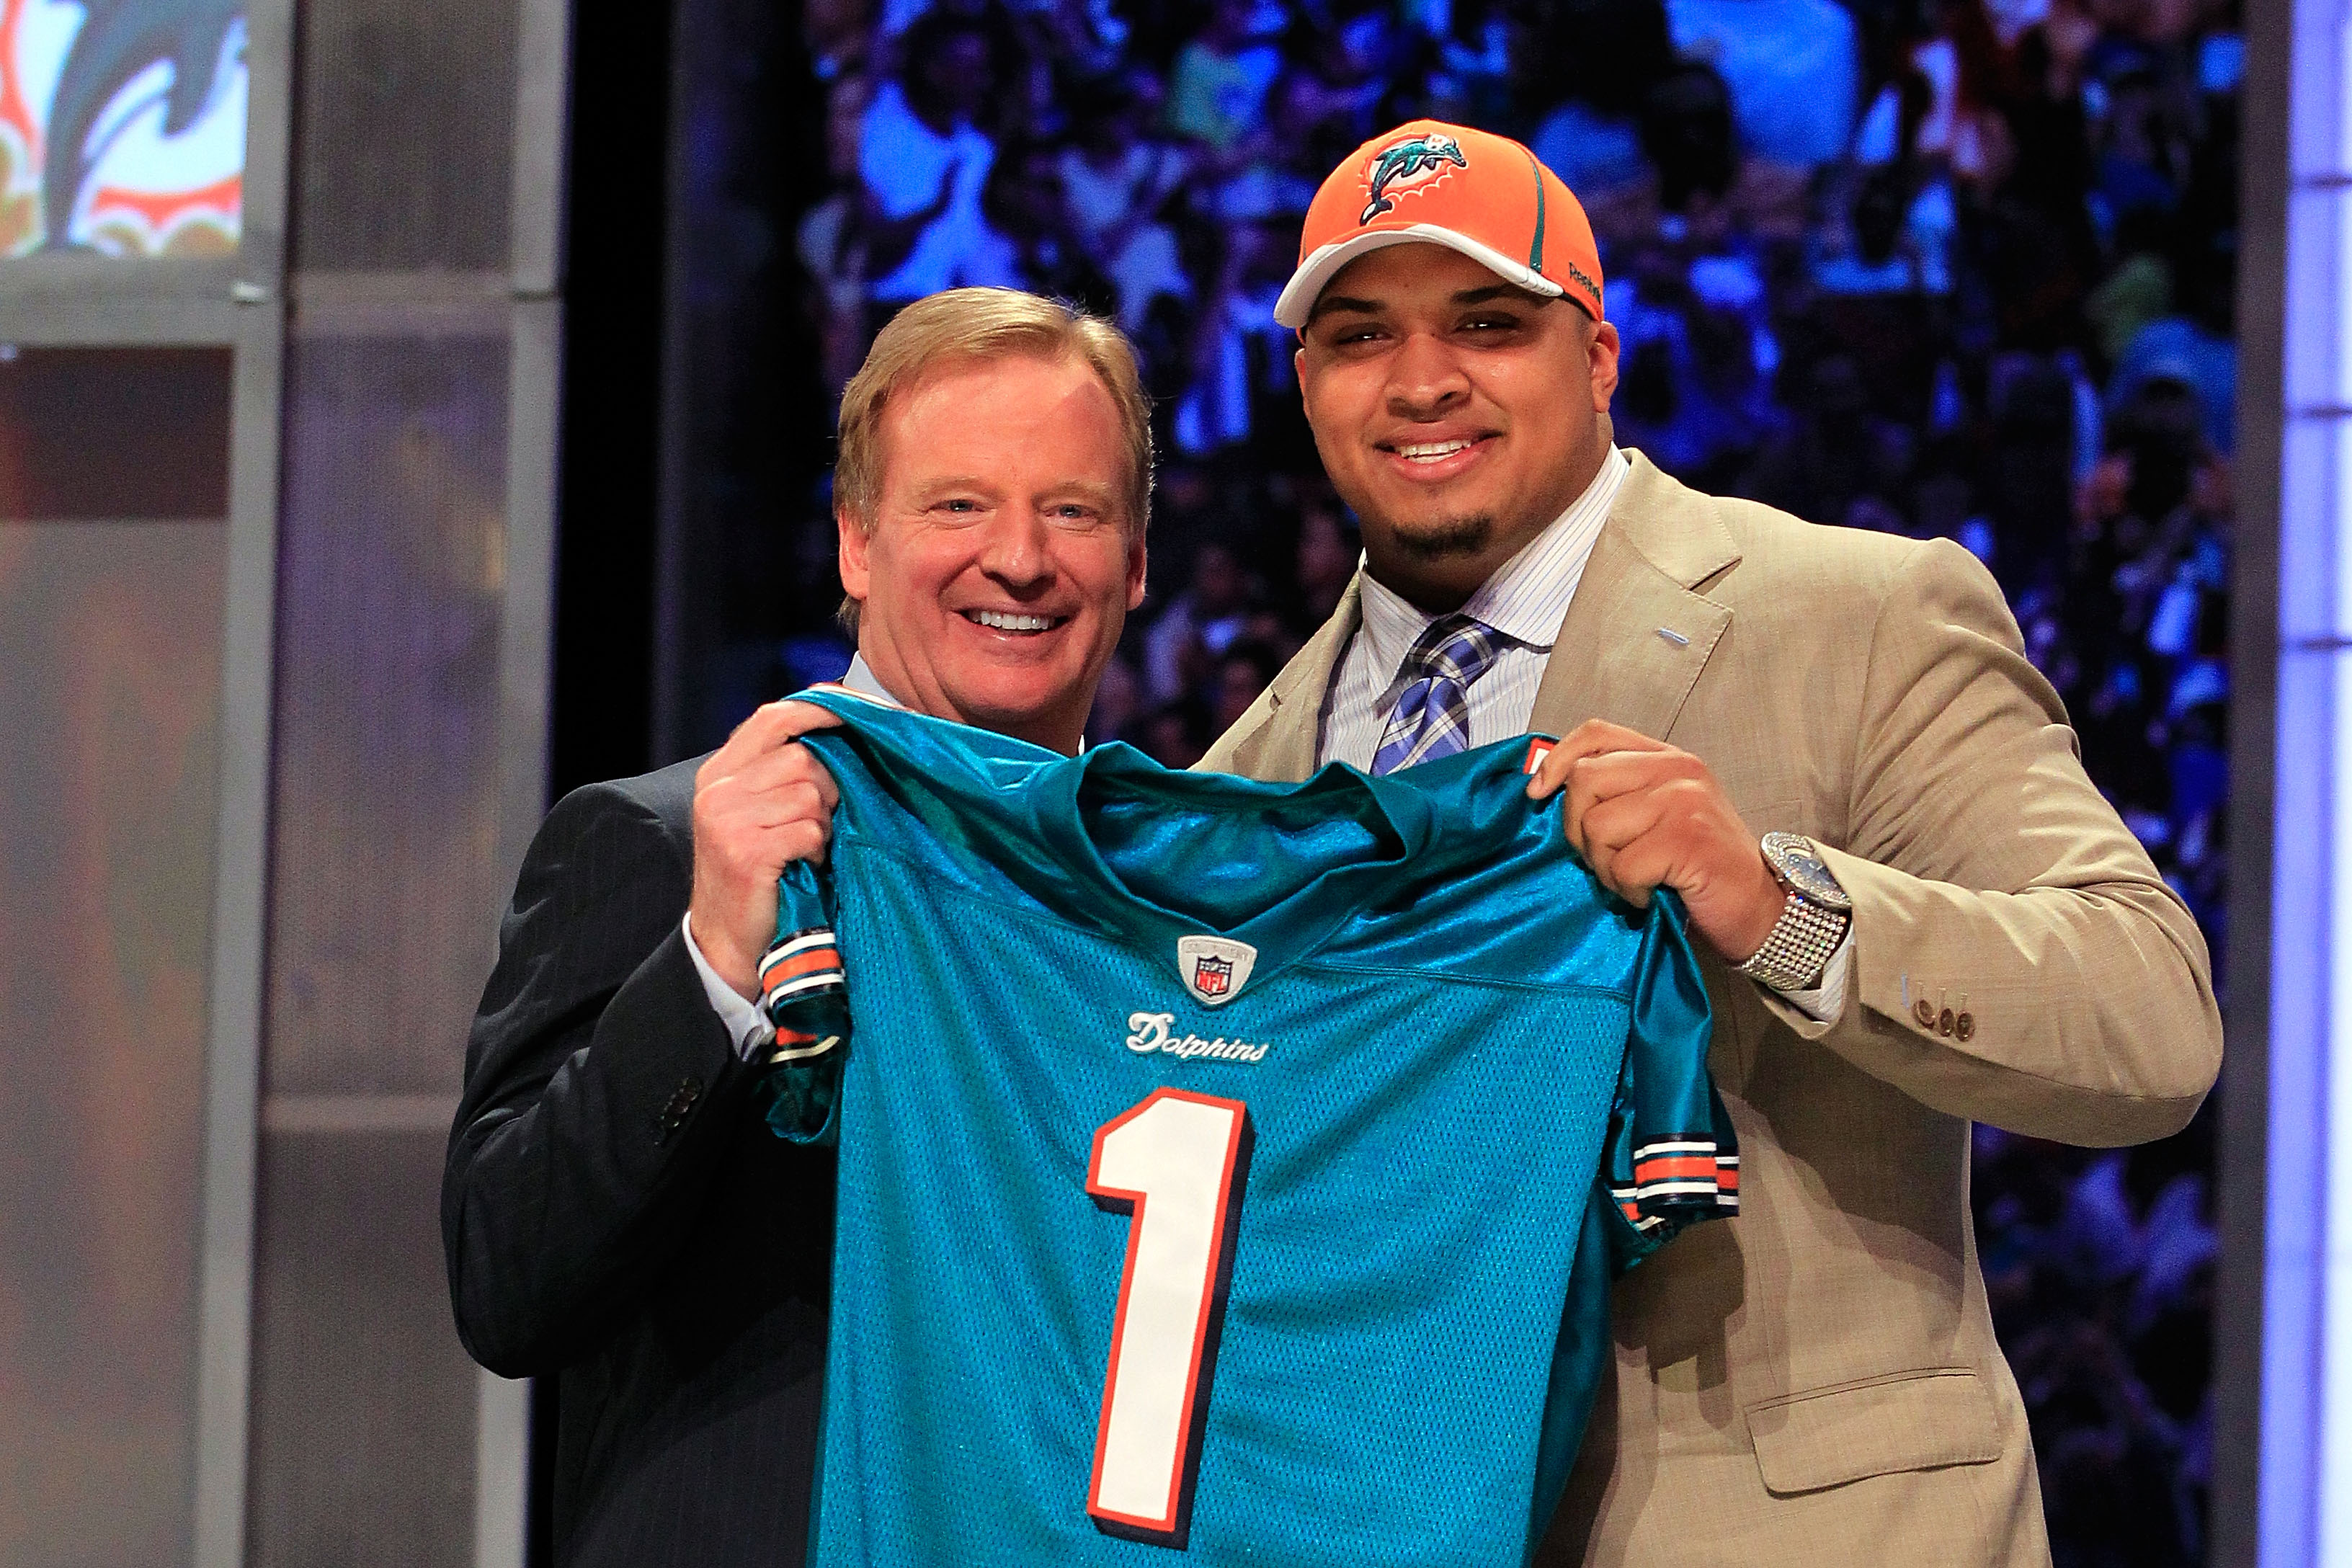 NEW YORK, NY - APRIL 28:  NFL Commissioner Roger Goodell poses for a photo with Mike Pouncey, #15 overall pick by the Miami Dolphins, on stage during the 2011 NFL Draft at Radio City Music Hall on April 28, 2011 in New York City.  (Photo by Chris Trotman/